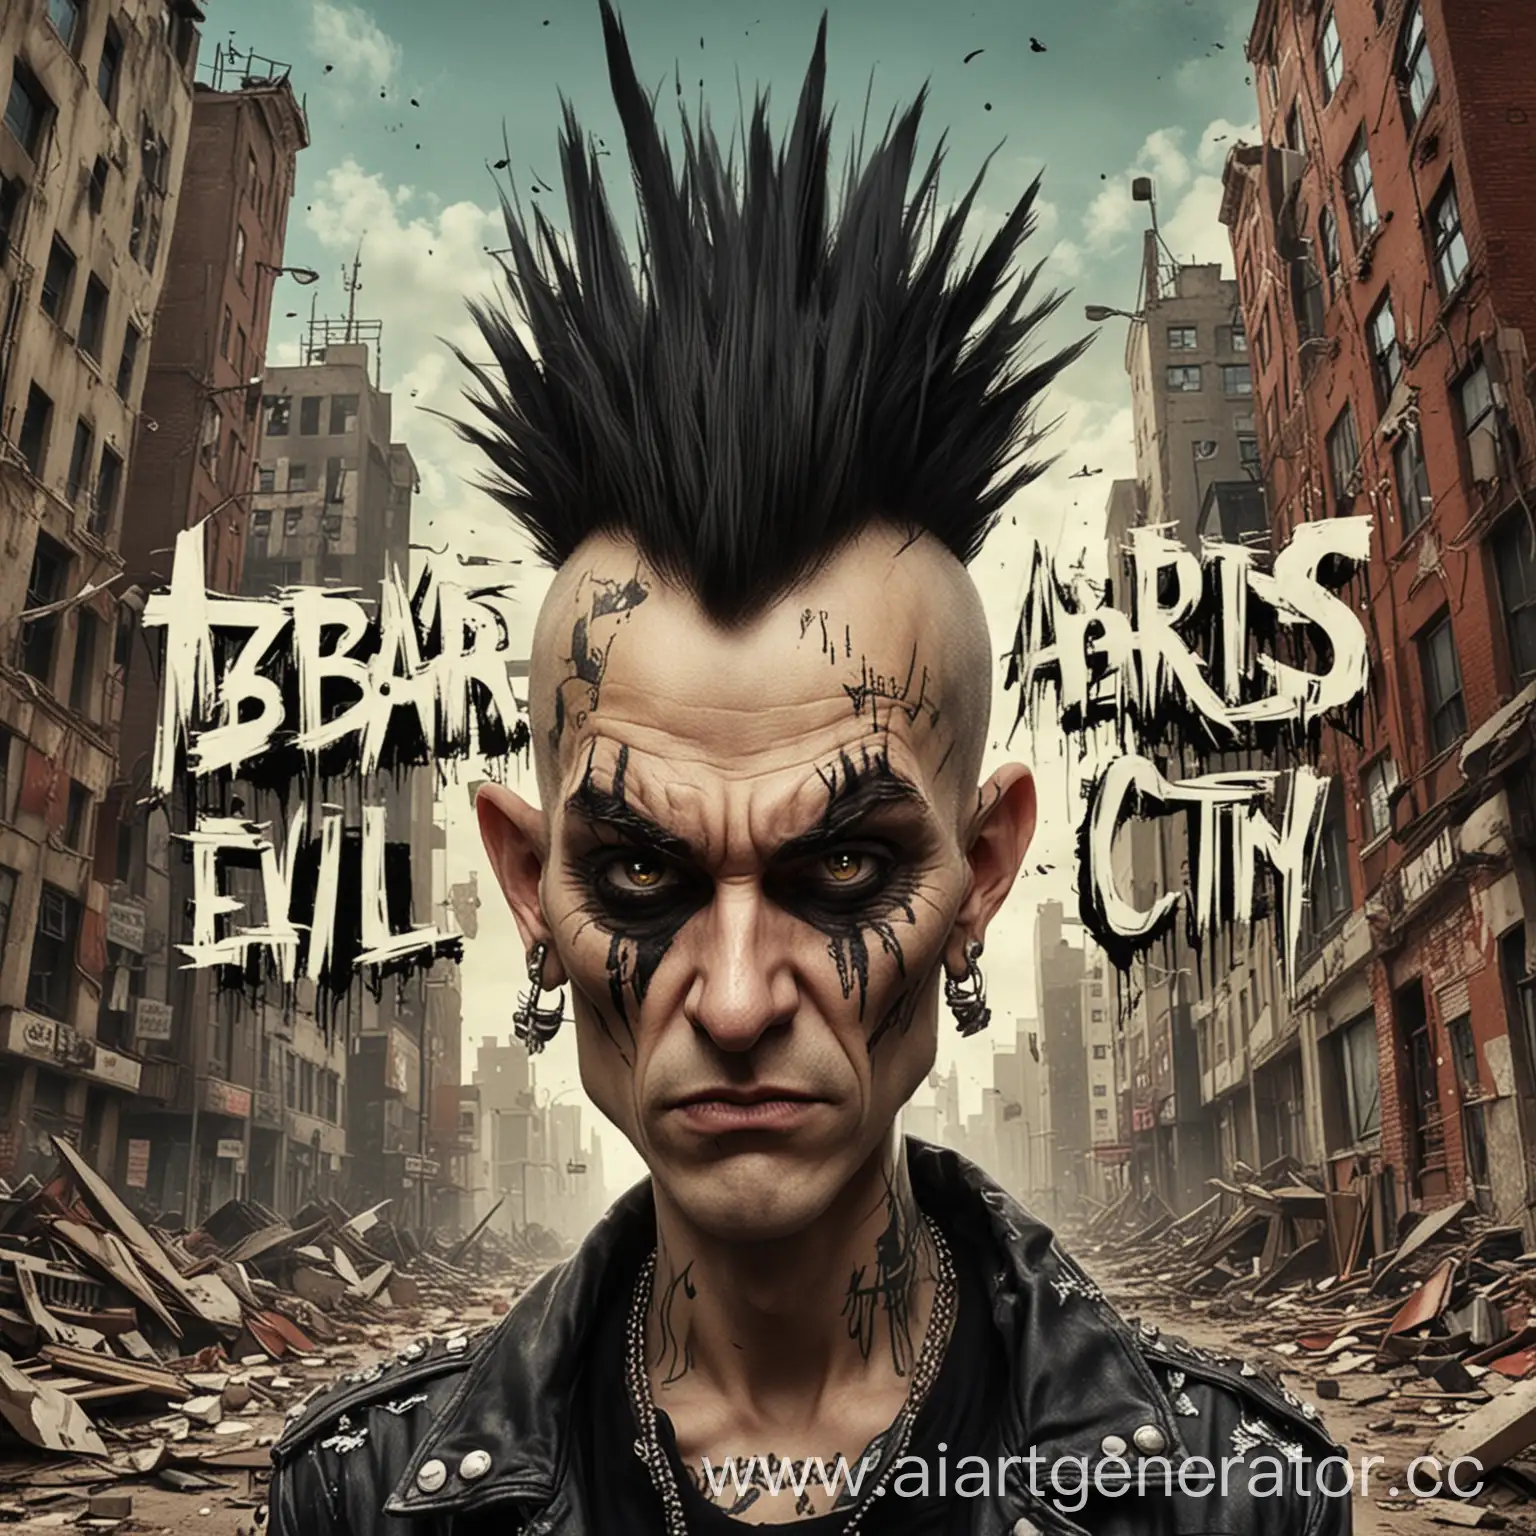 Evil-Punk-with-Mohawk-in-Destroyed-City-Zubbastards-Album-Cover